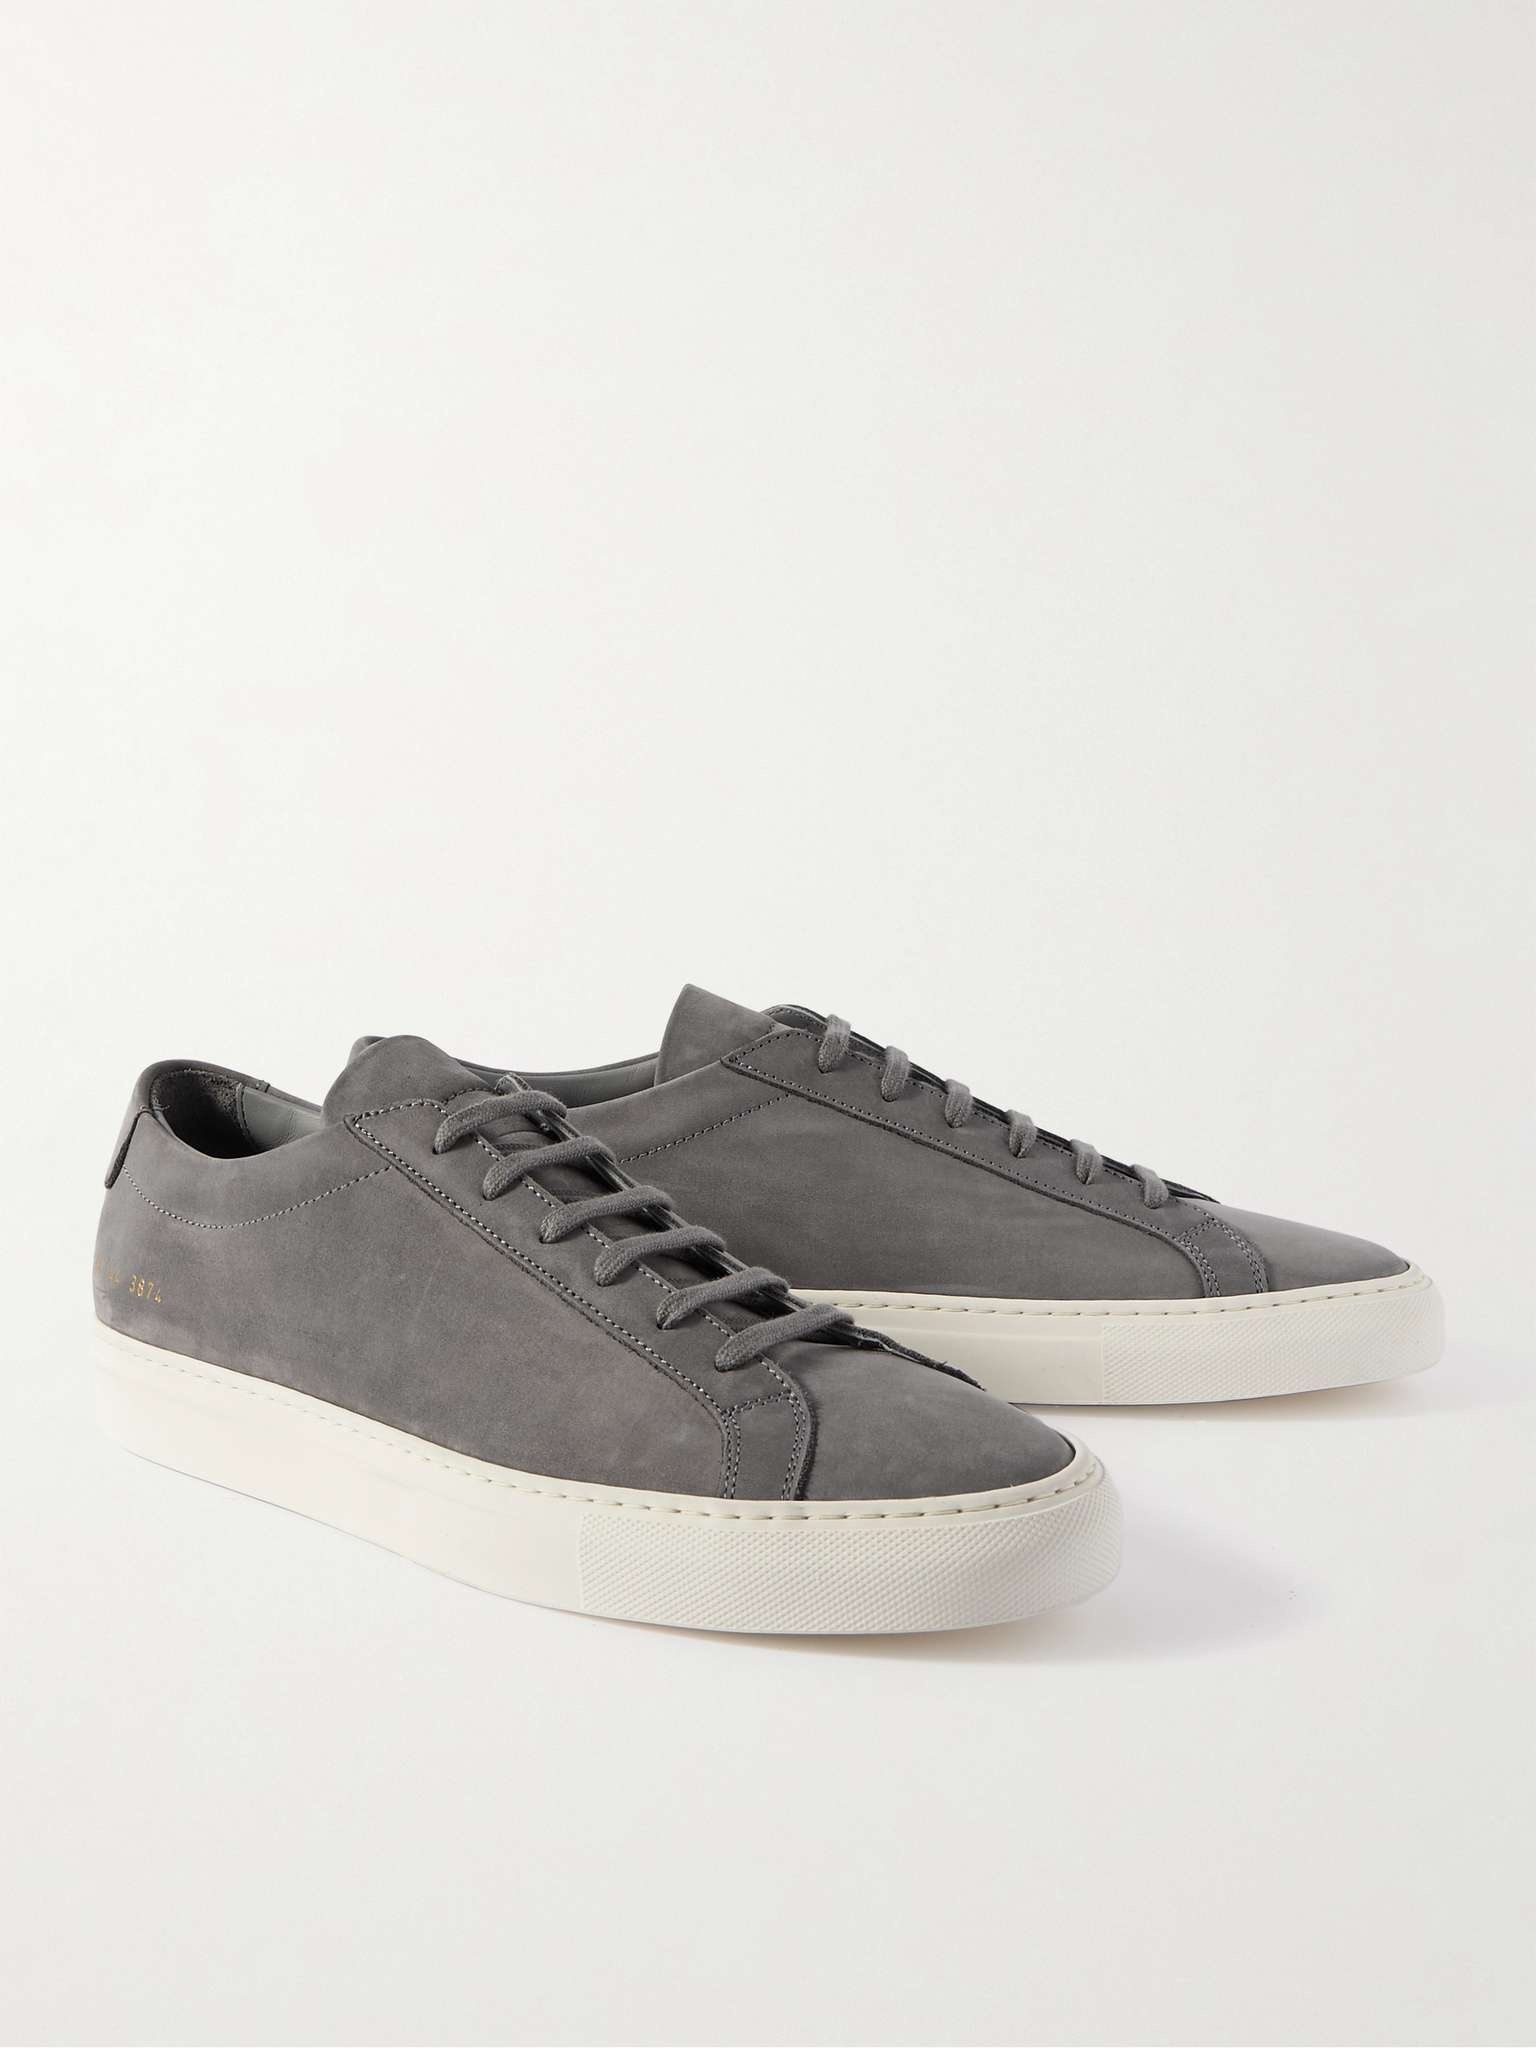 Common Projects Achilles Nubuck Sneakers | REVERSIBLE